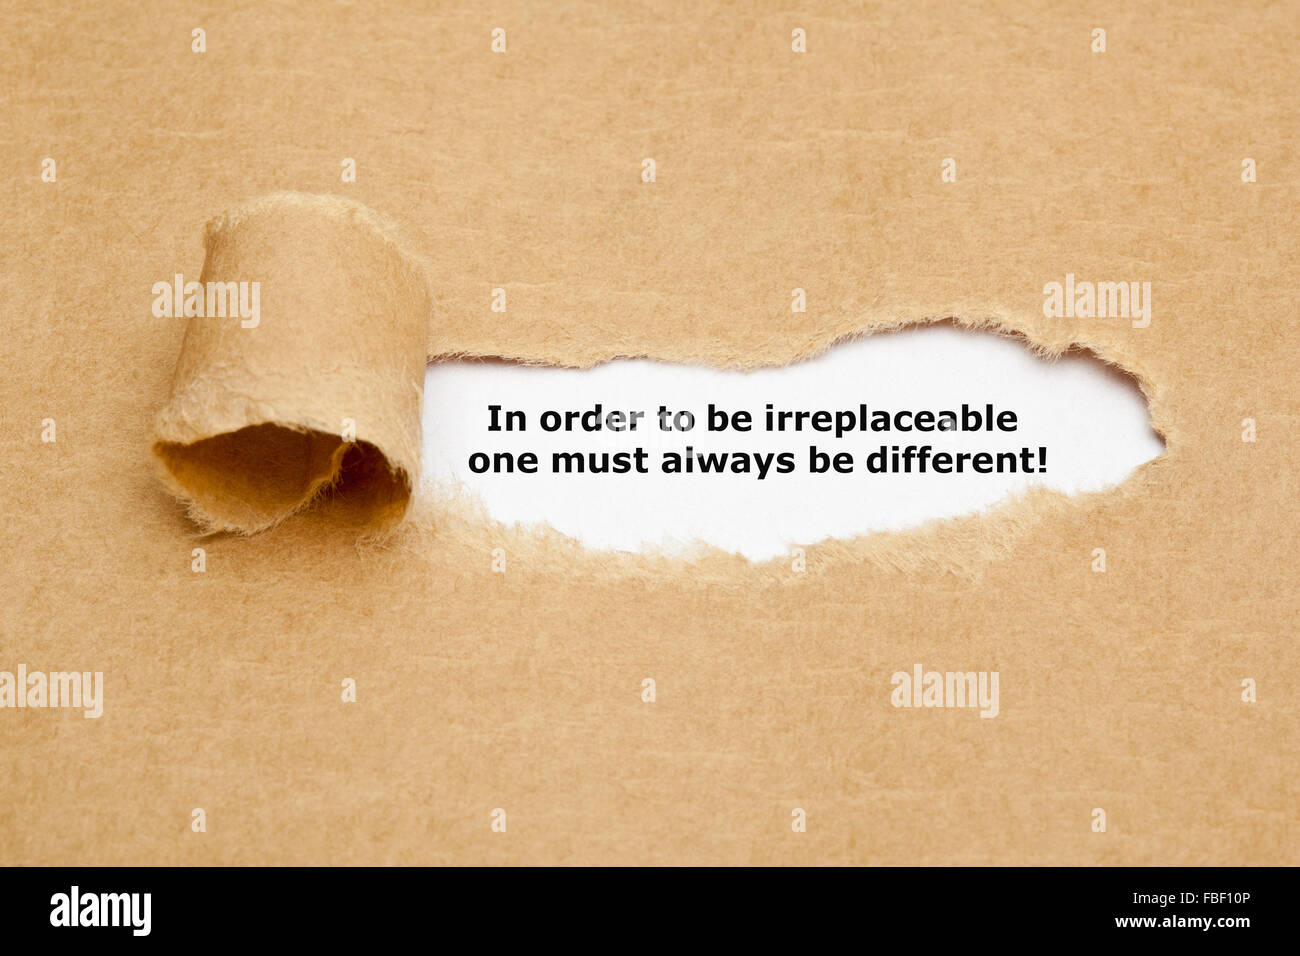 The motivational quote In order to be irreplaceable one must always be different, appearing behind torn paper. Stock Photo